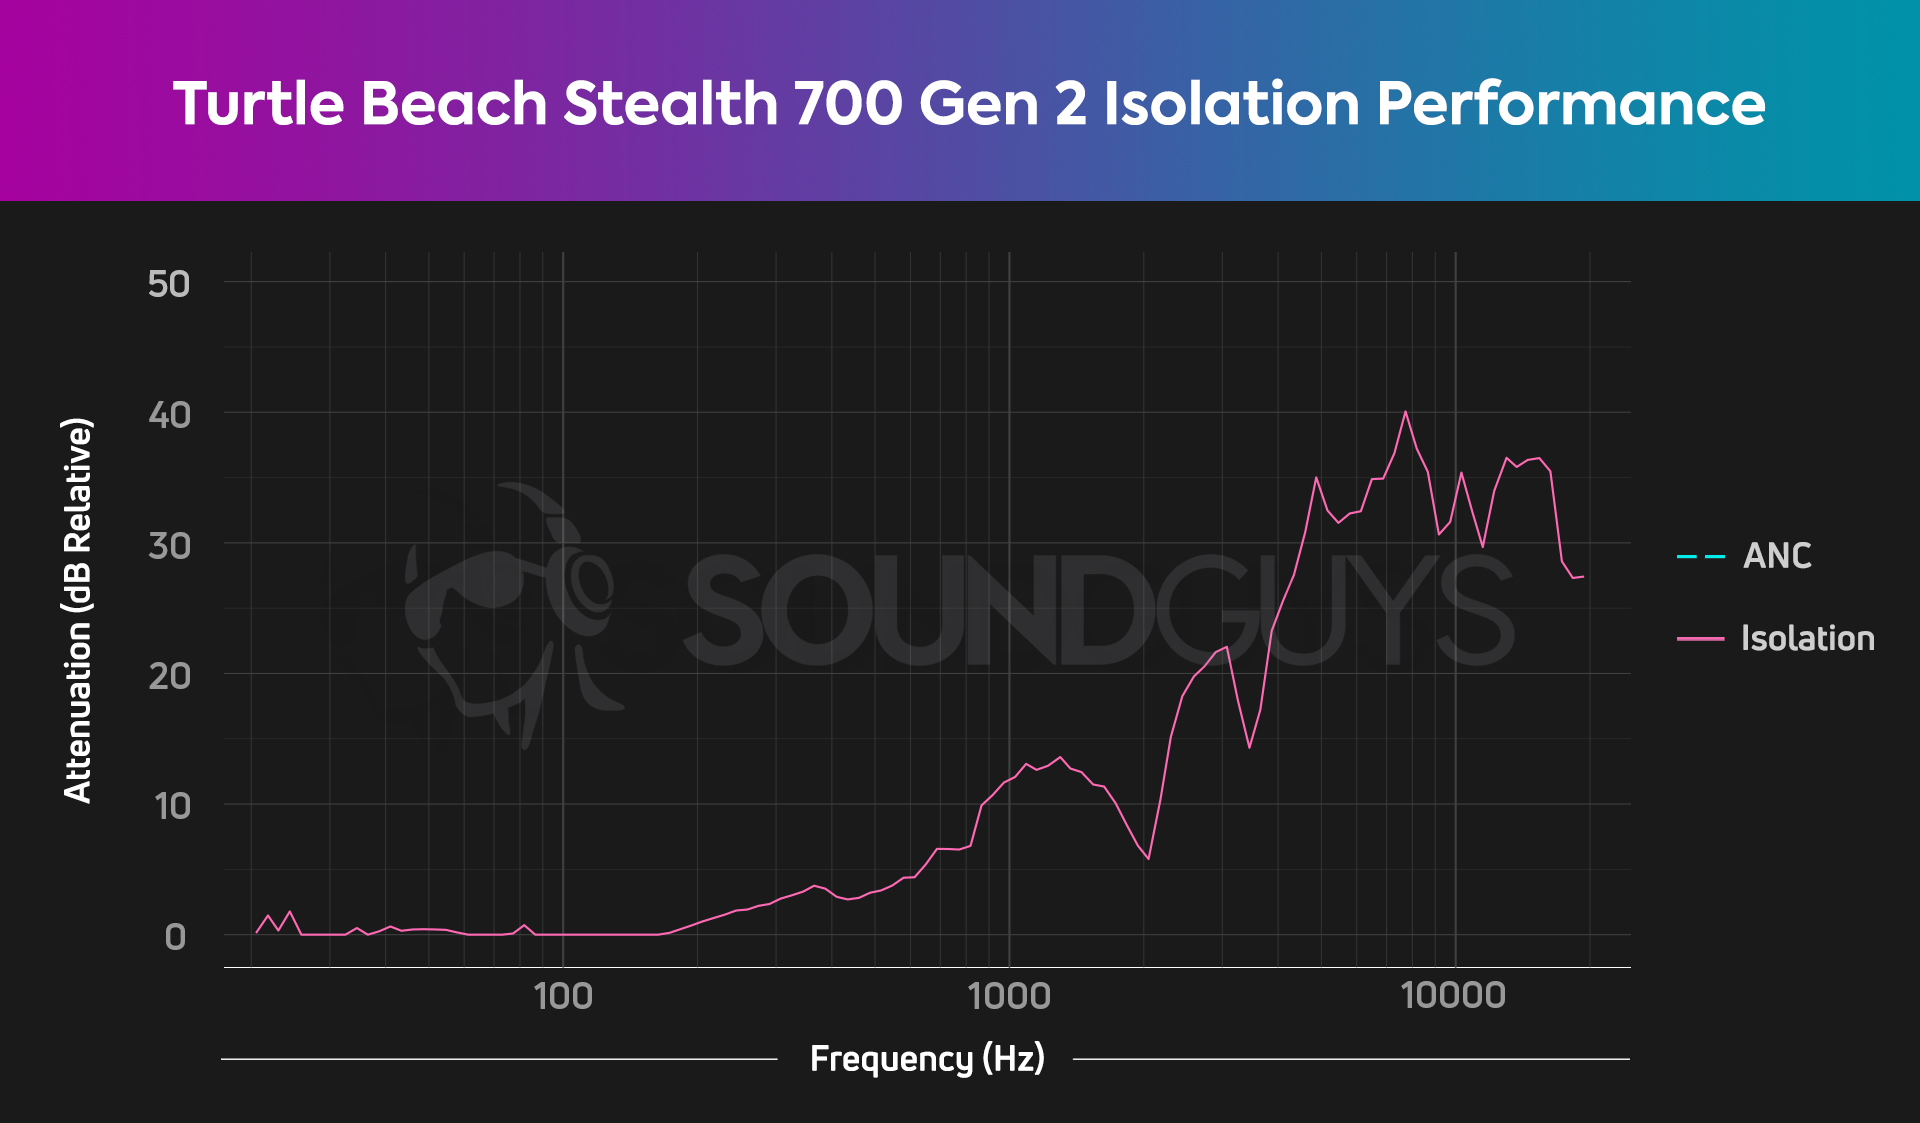 An isolation chart for the Turtle Beach Stealth 700 Gen 2, which shows poor attentuation.